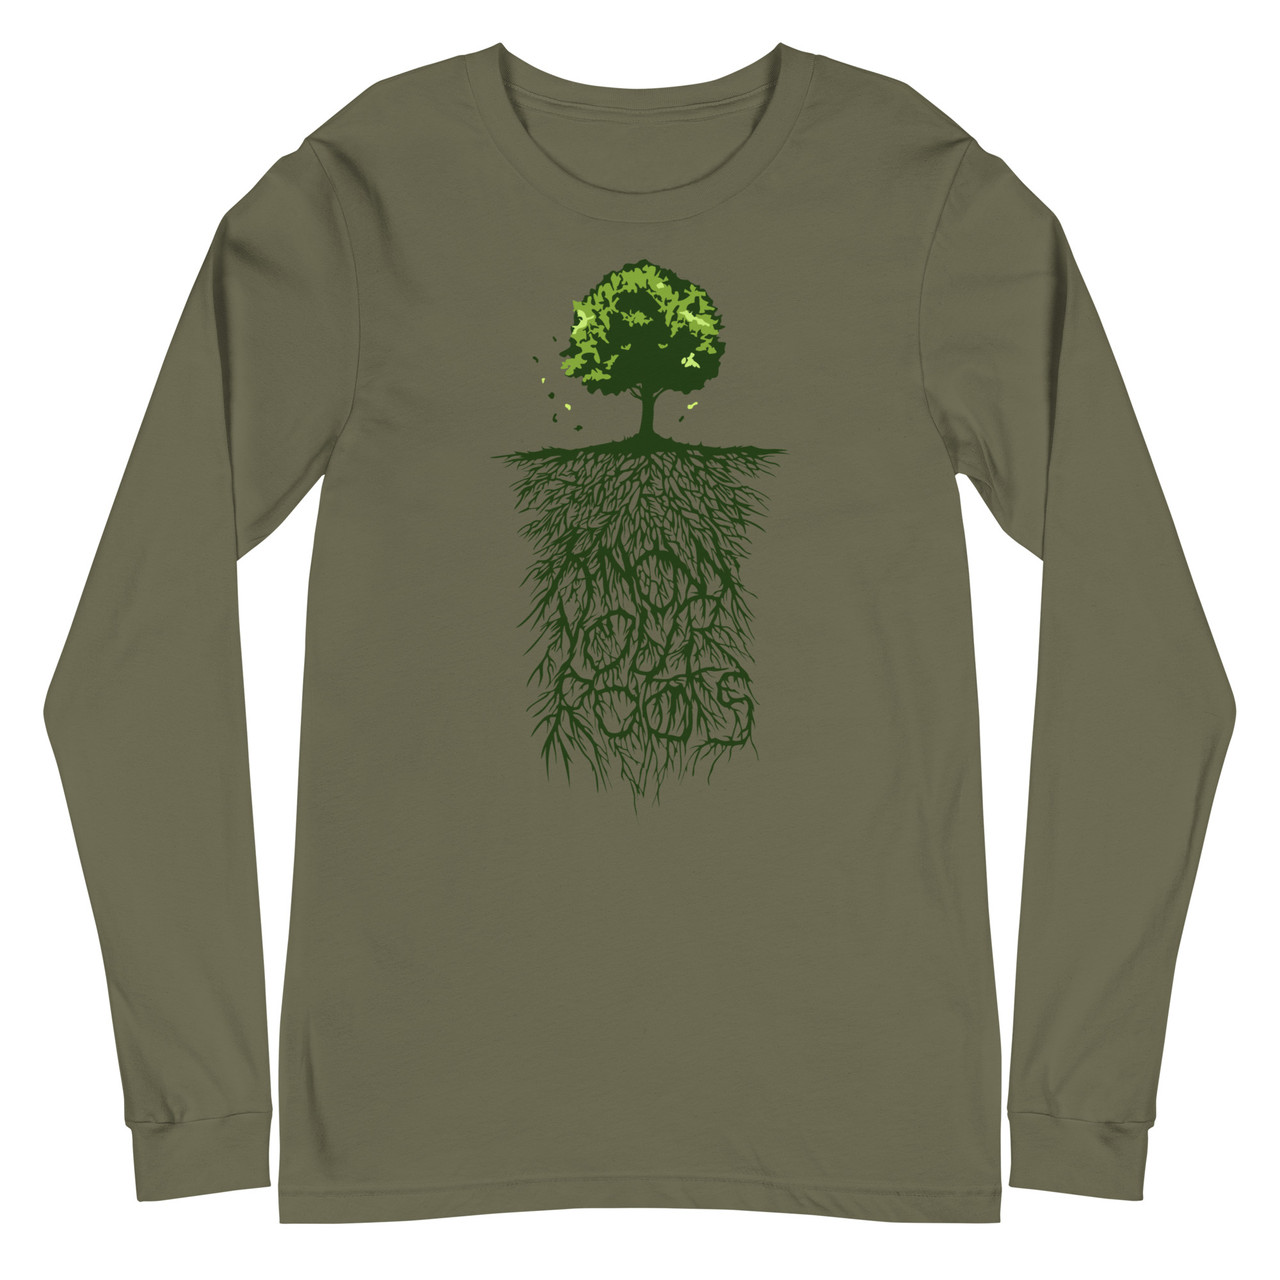 Know Your Roots Unisex Long Sleeve Tee - Bella + Canvas 3501 